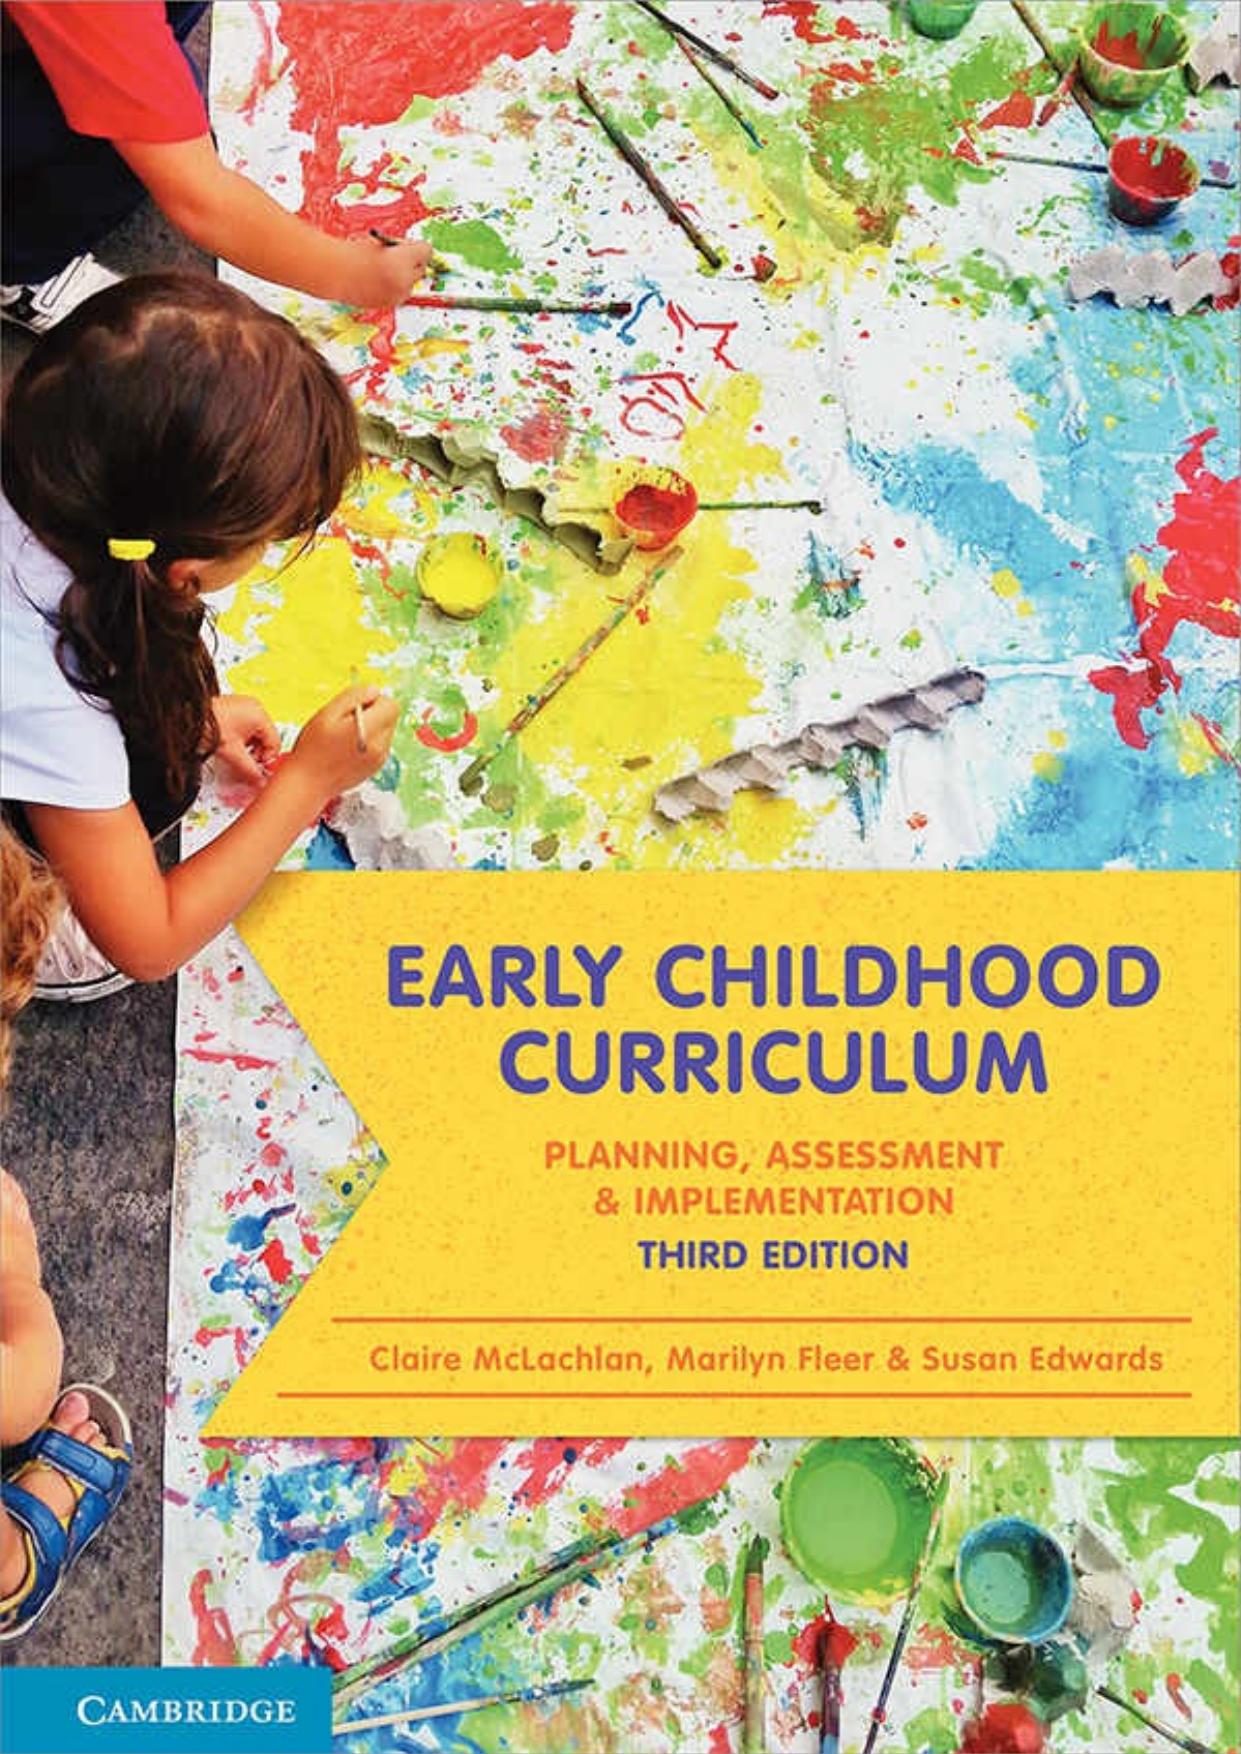 Early Childhood Curriculum_ Planning, Assessment and Implementation - Claire McLachlan & Marilyn Fleer & Susan Edwards.jpg